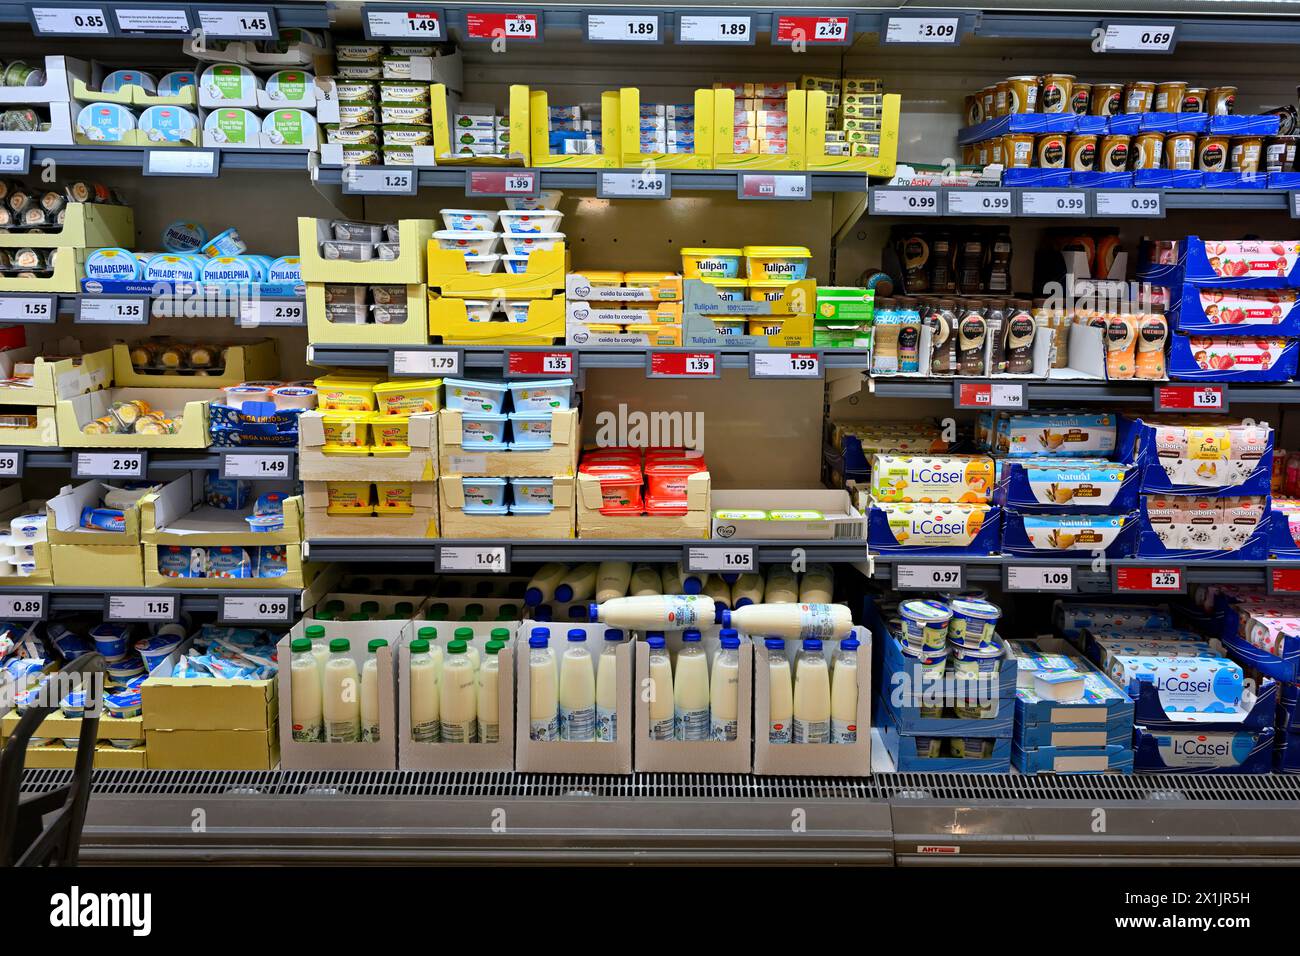 Shelves in the dairy section of supermarket with milk, butter, some so soft cheeses and dairy based drinks Stock Photo